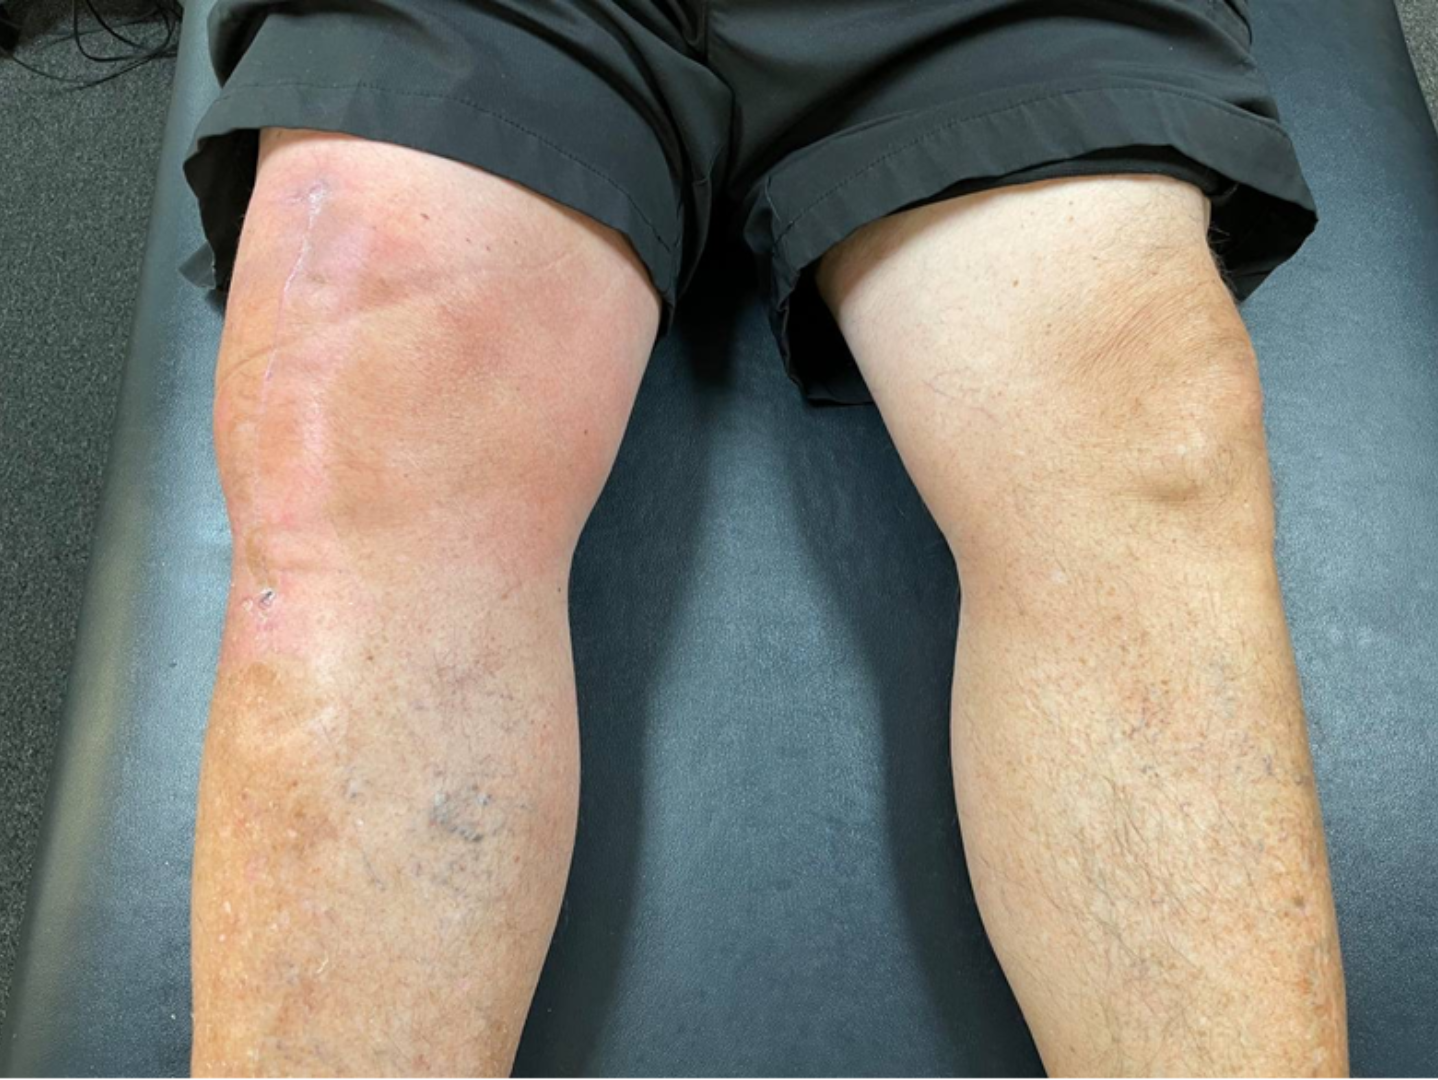 patient suffering from a swollen leg following a surgery or injury, to answer the question why does swelling occur